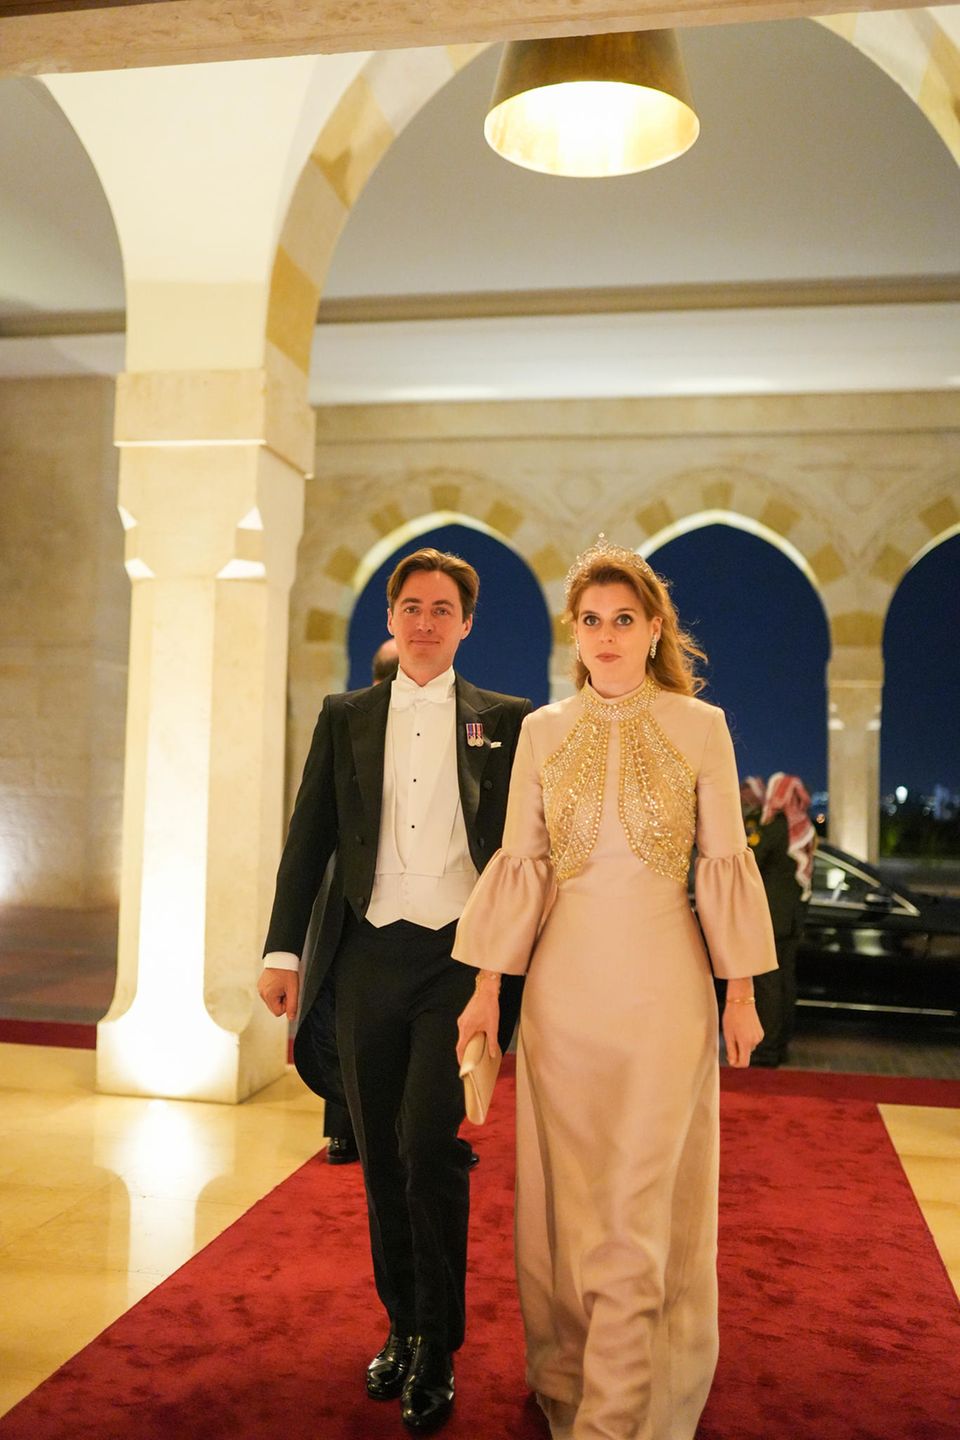 Princess Beatrice and Edoardo Mapelli Mozzi in the evening on their way to the state banquet